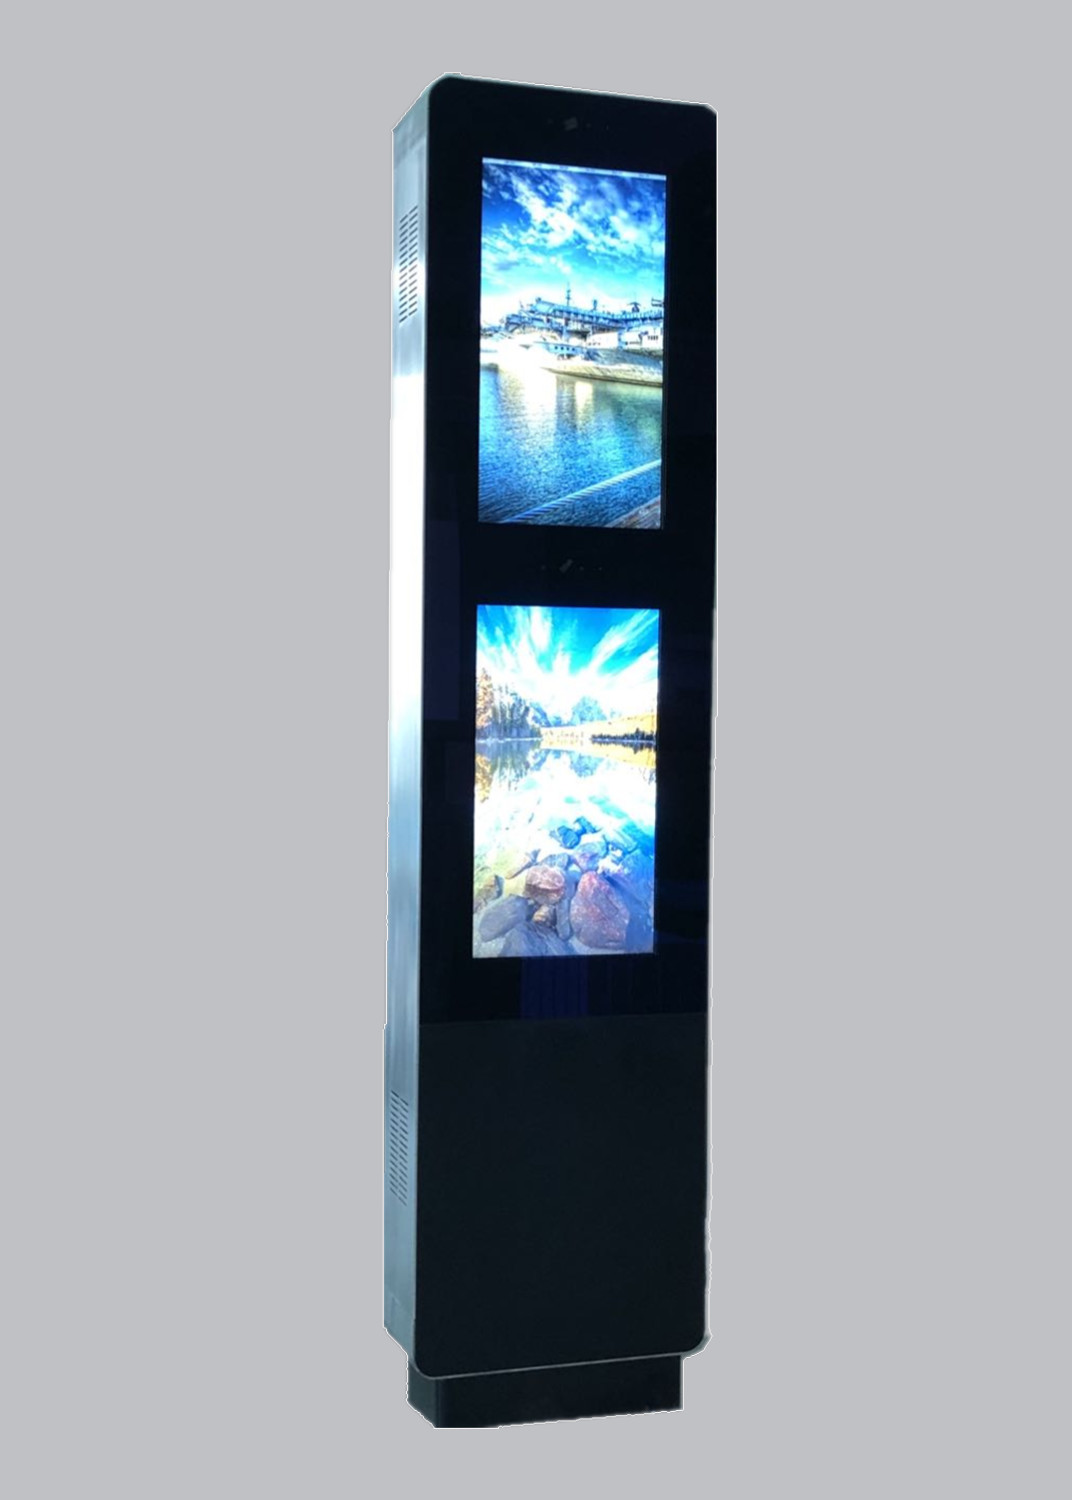 32”Bus Stop Kiosk, Double Sided LCD Display